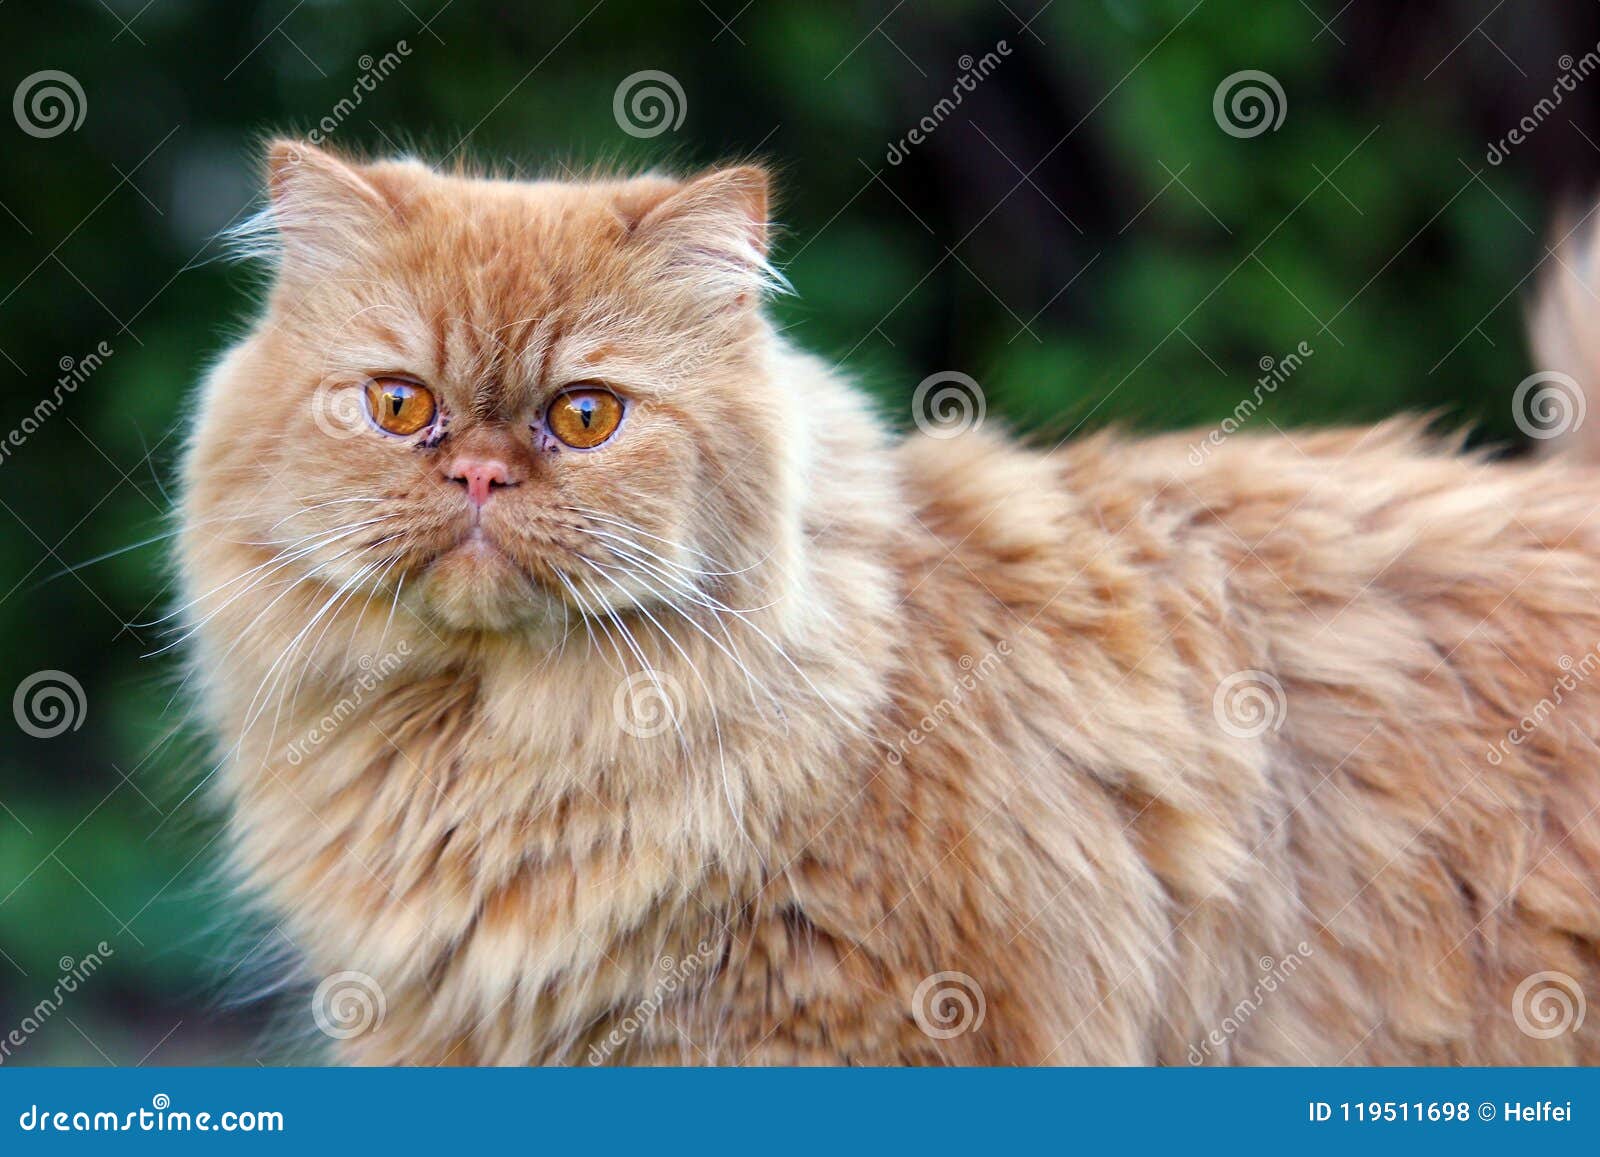 The Persian Cat Is One Of The Oldest 